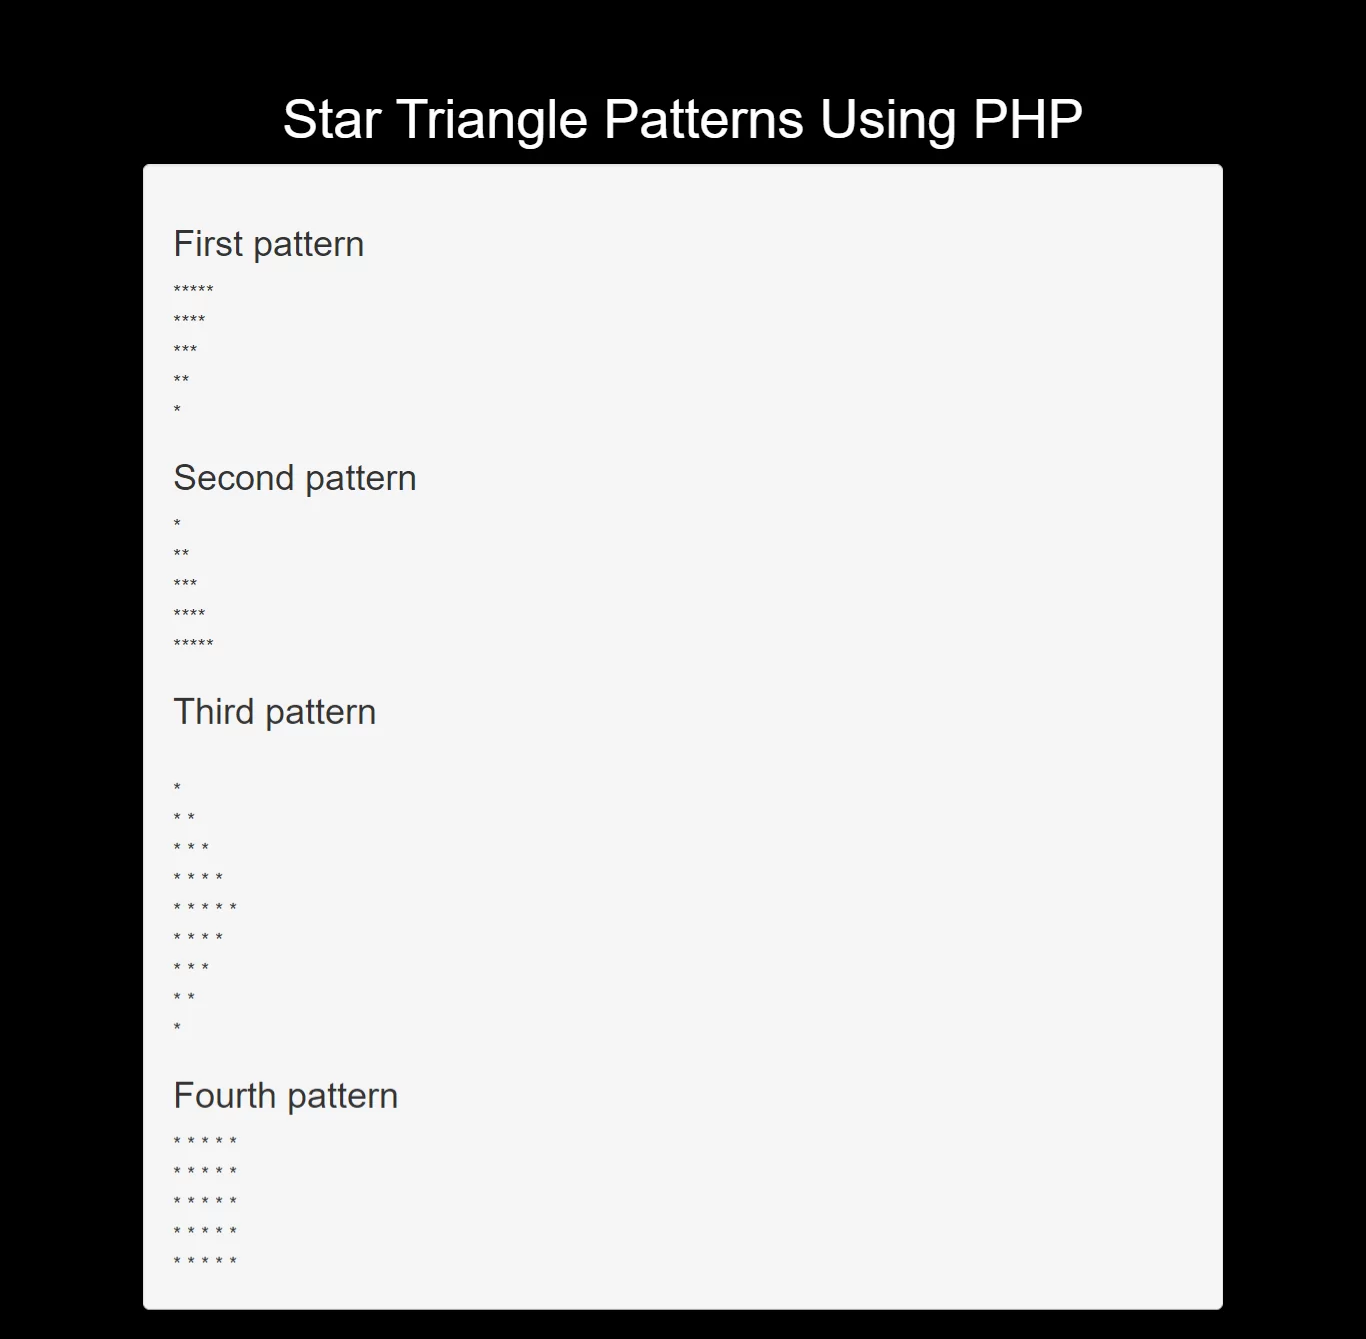 How Can I Display Star Patterns Patterns Using PHP